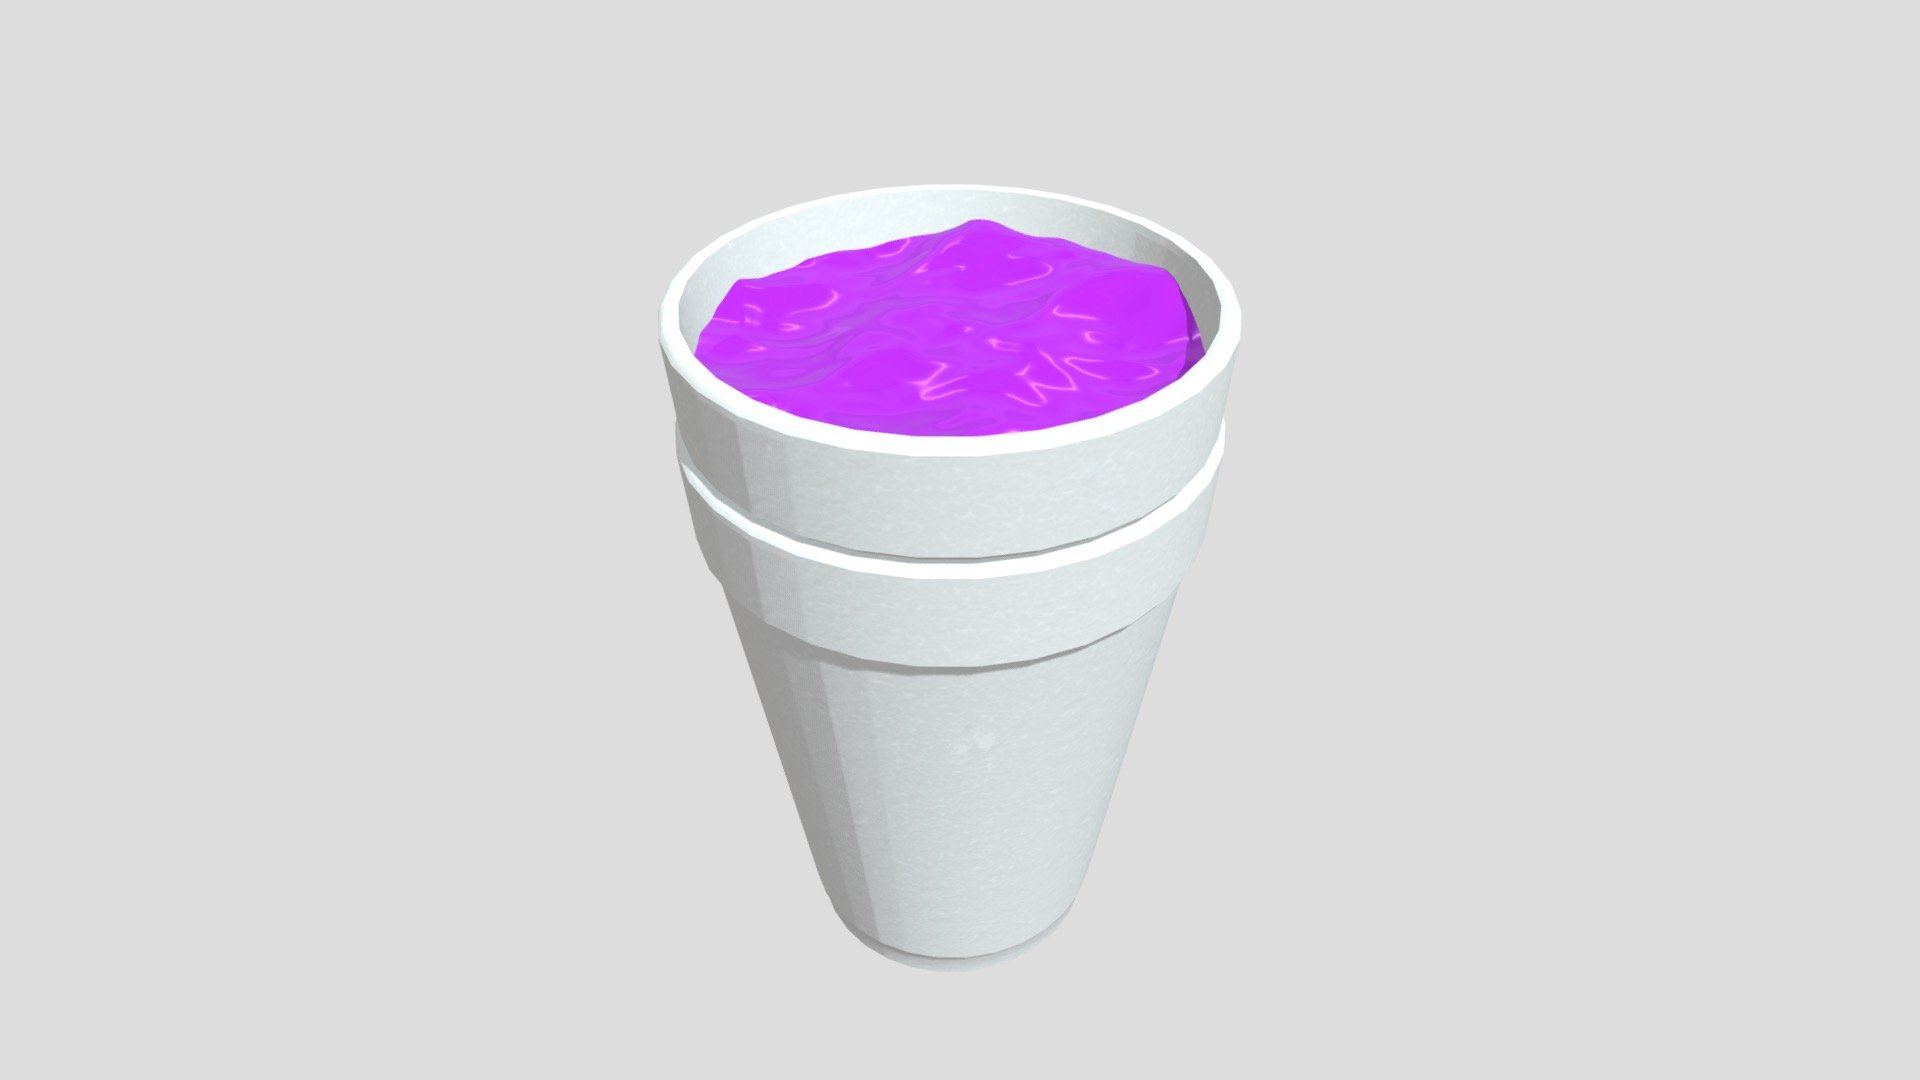 Cups Of Lean And Weed